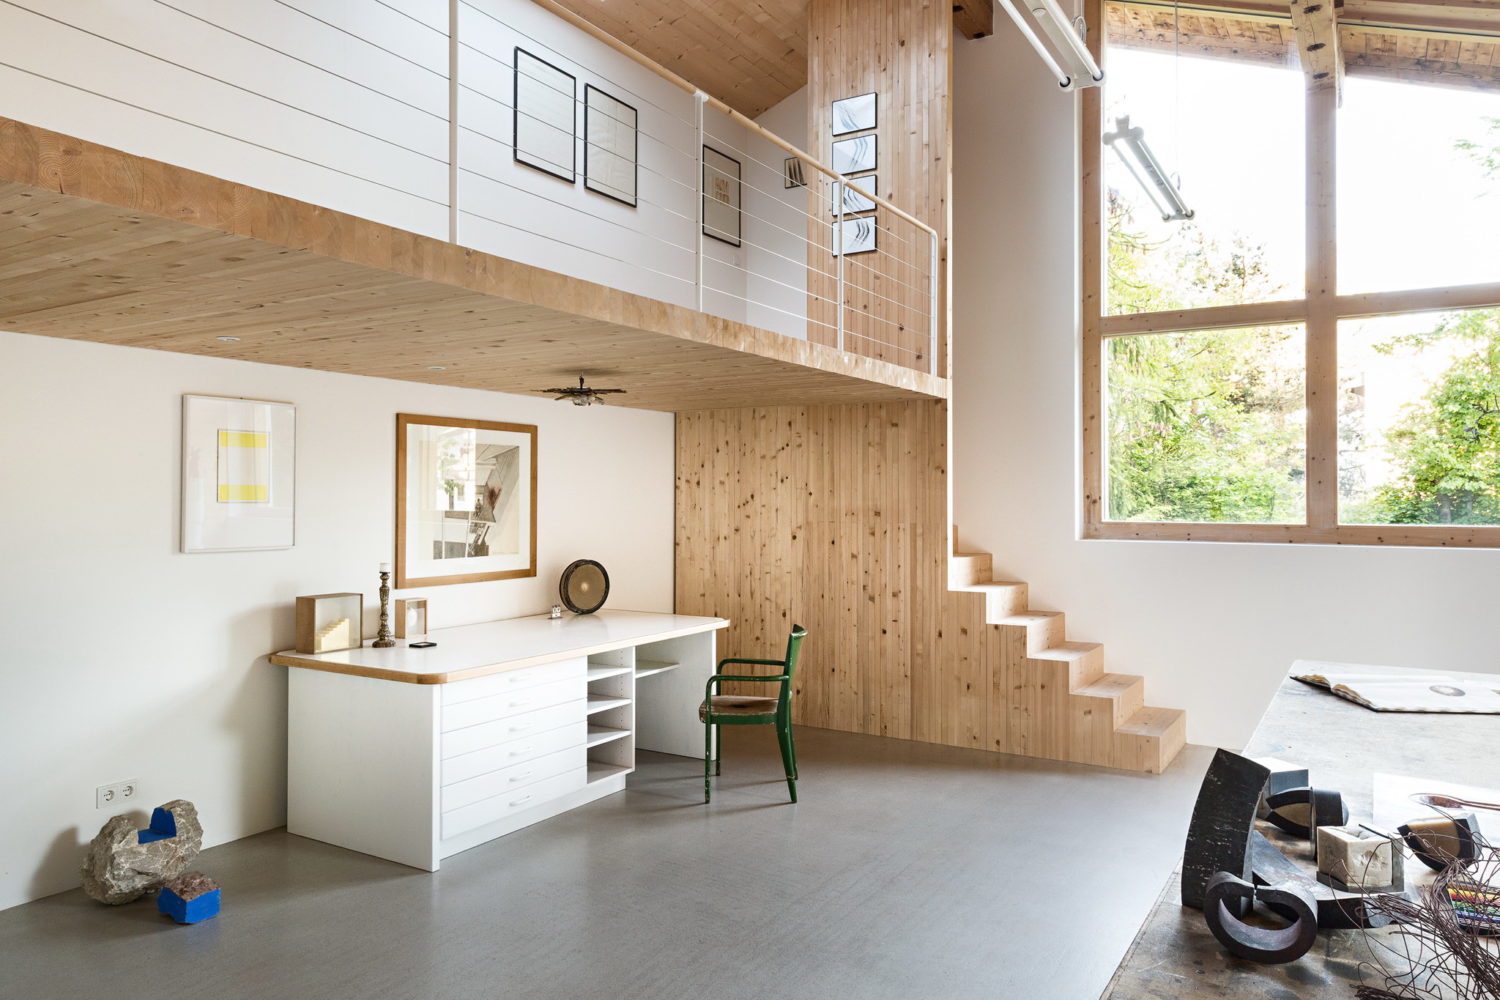 Workshop Renovation by Messner Architects